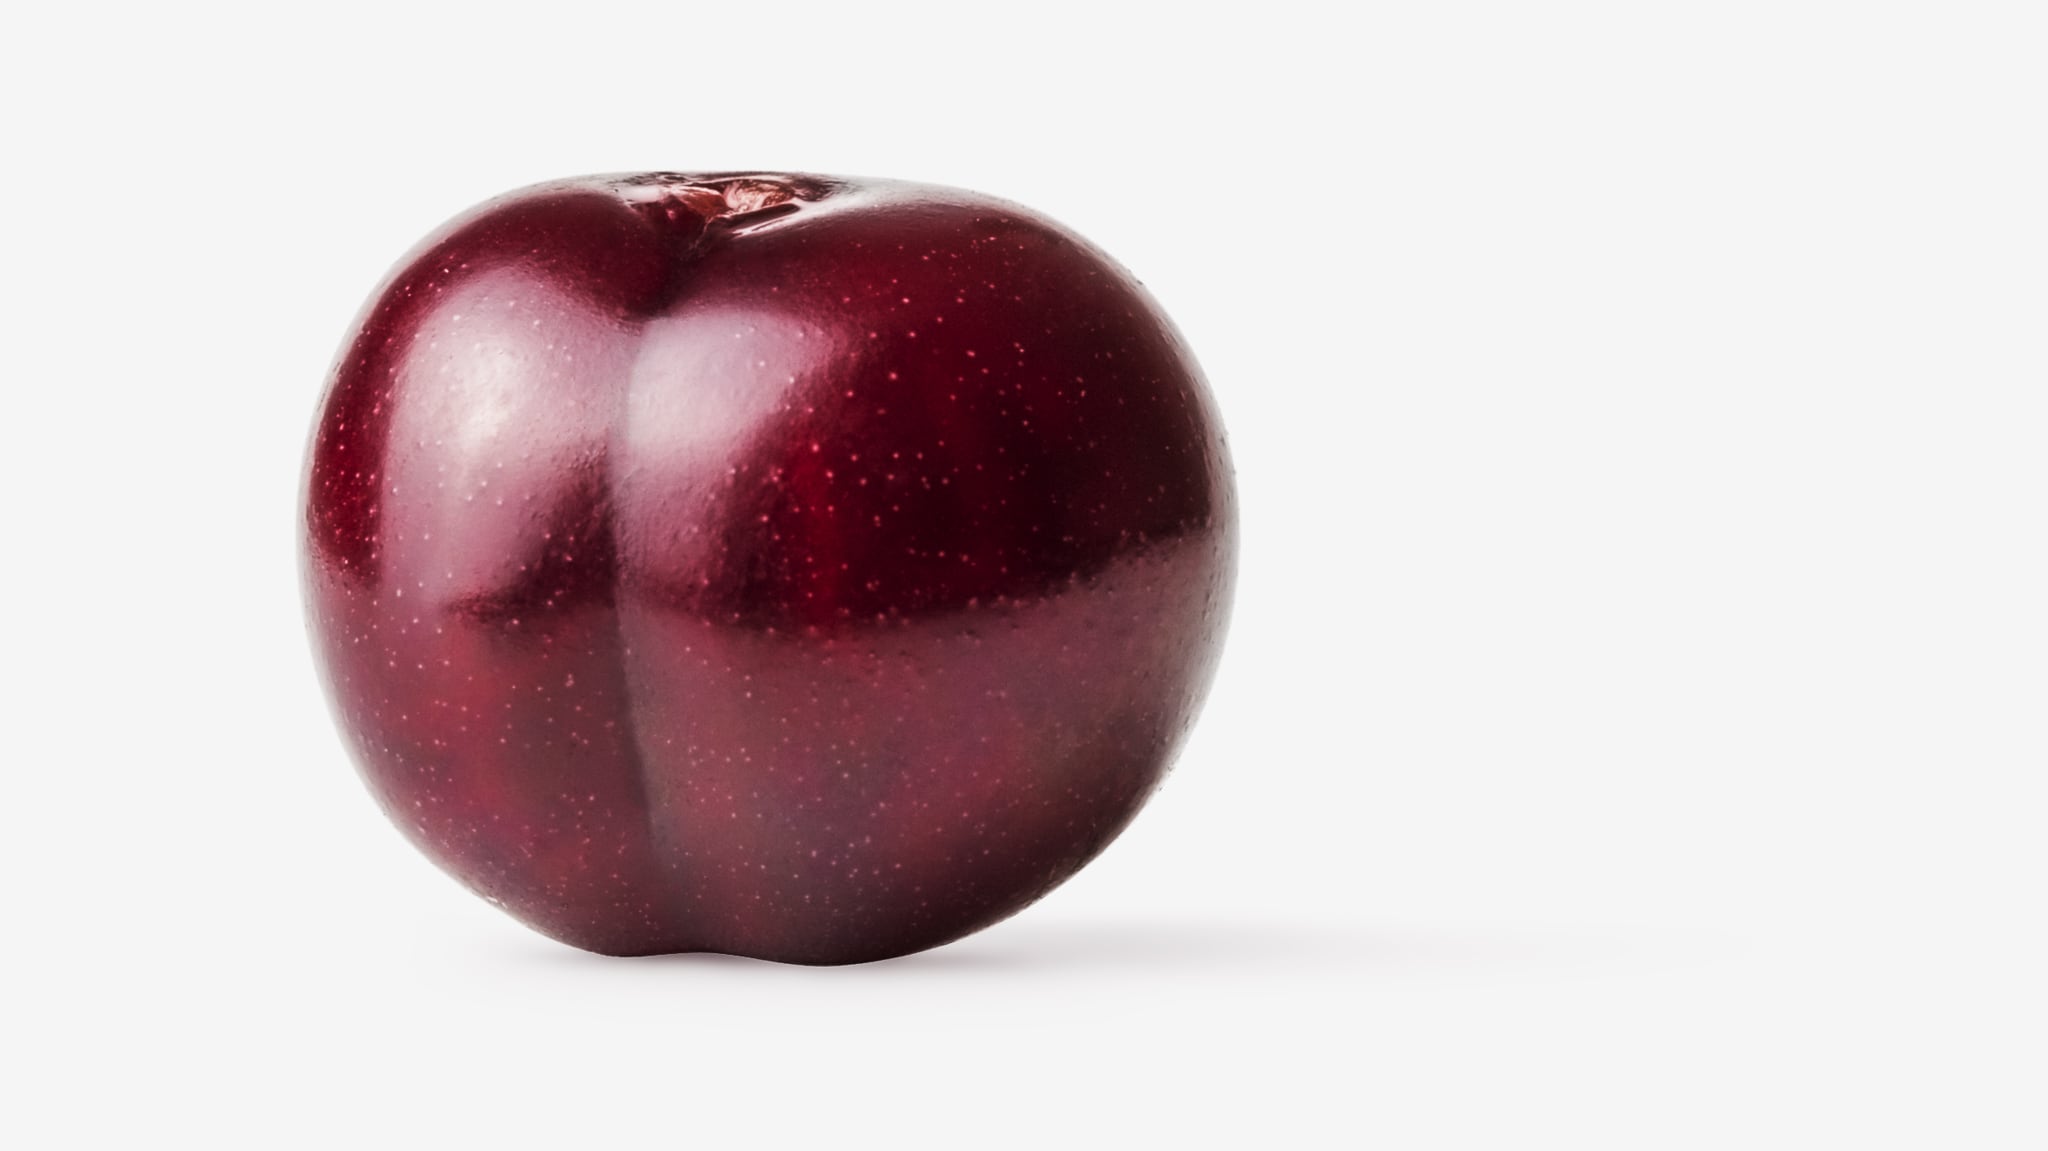 Cherry PSD isolated image